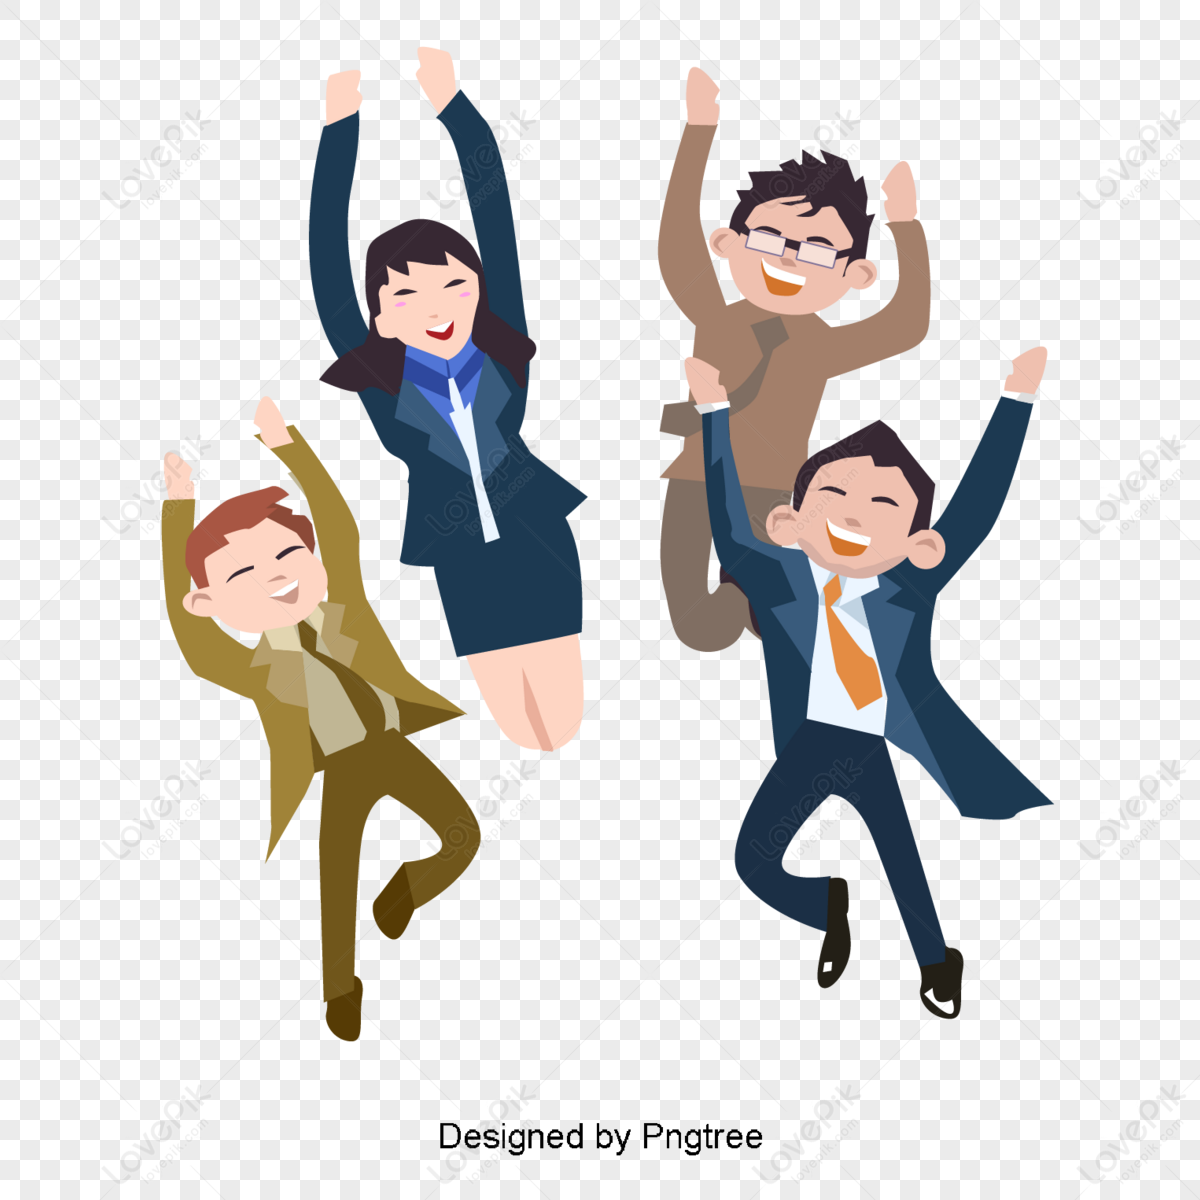 Jumping Silhouette PNG And Vector Images Free Download - Pngtree